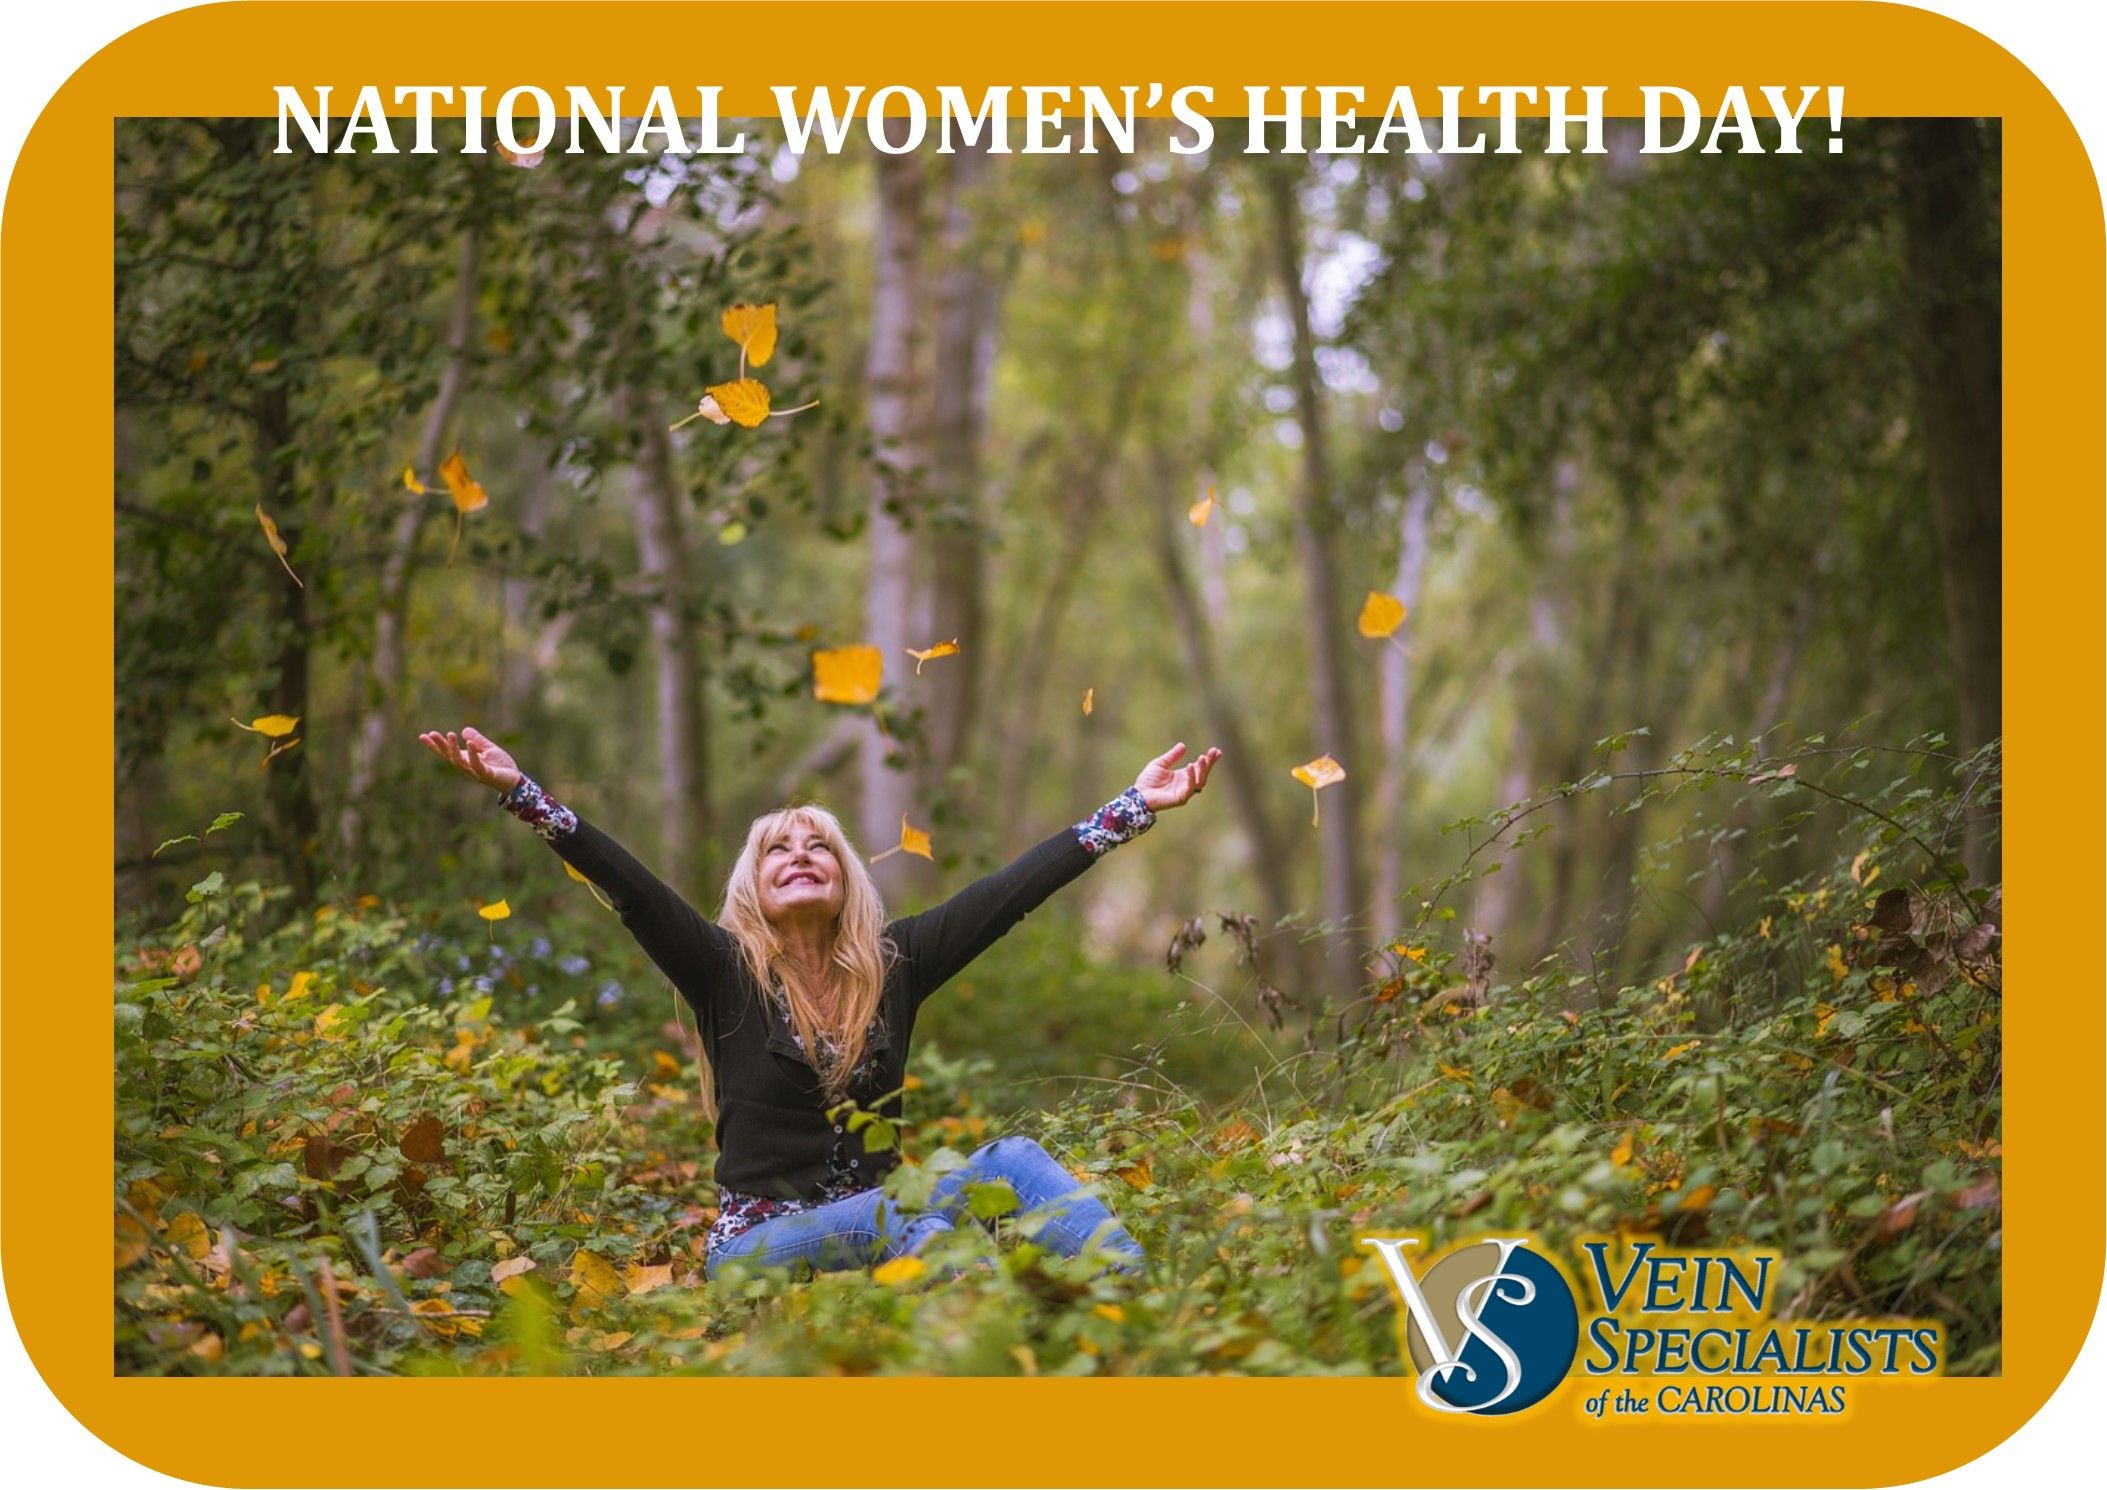 This is National Women’s Health Day!